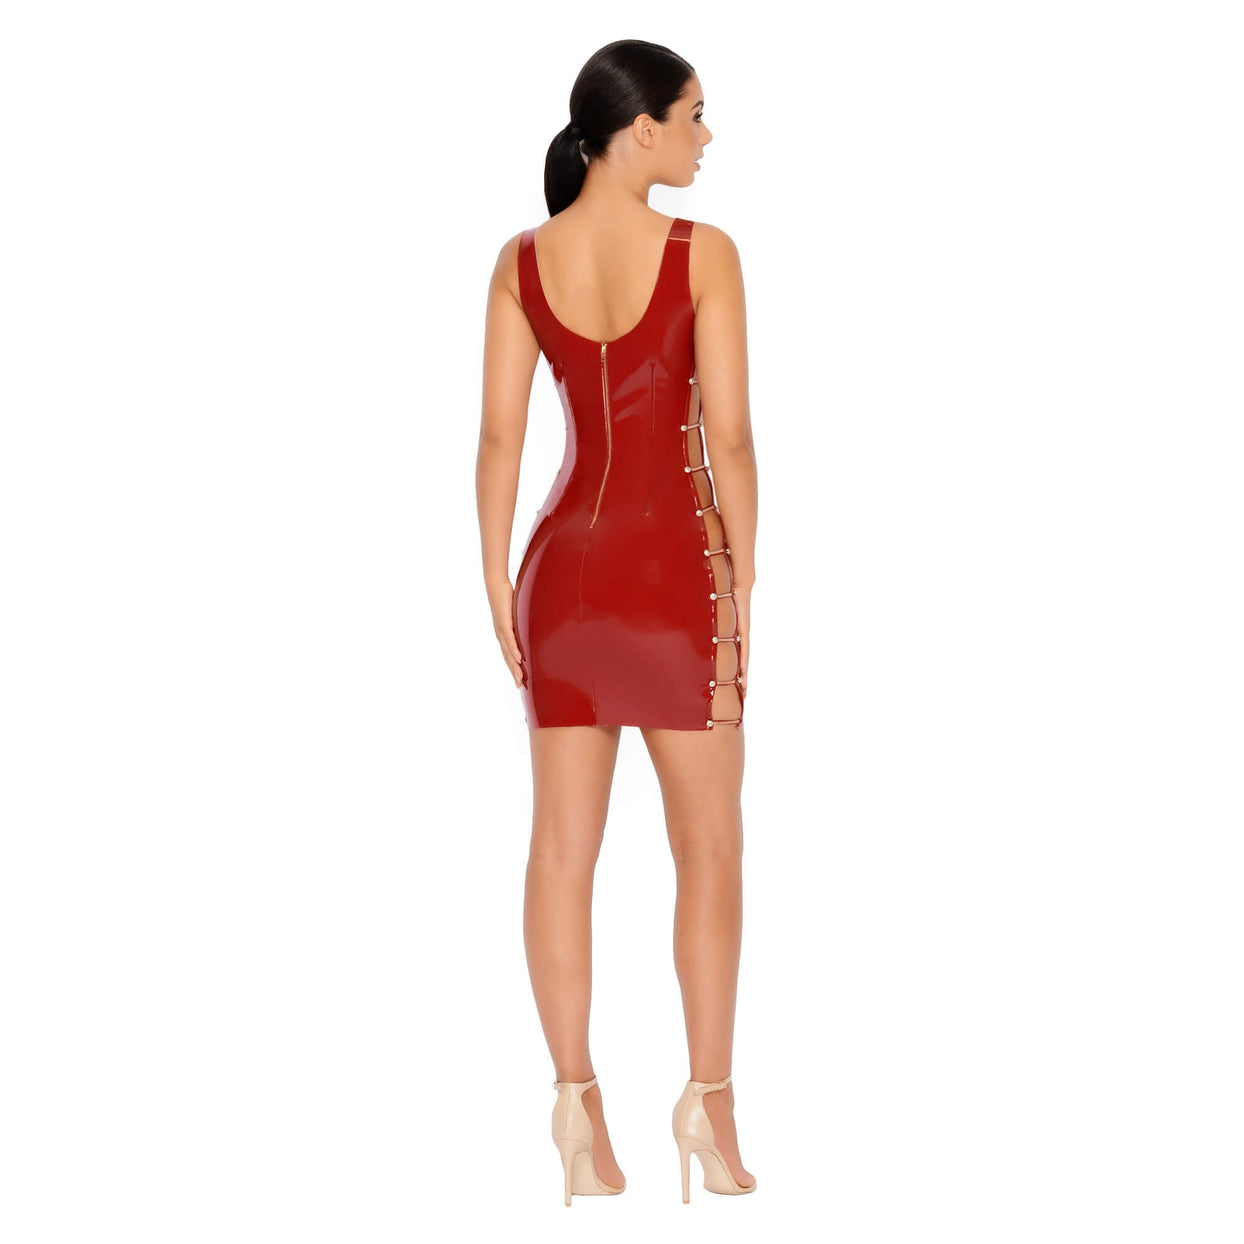 Chain Me Down Cut Out Vinyl Mini Dress in Red